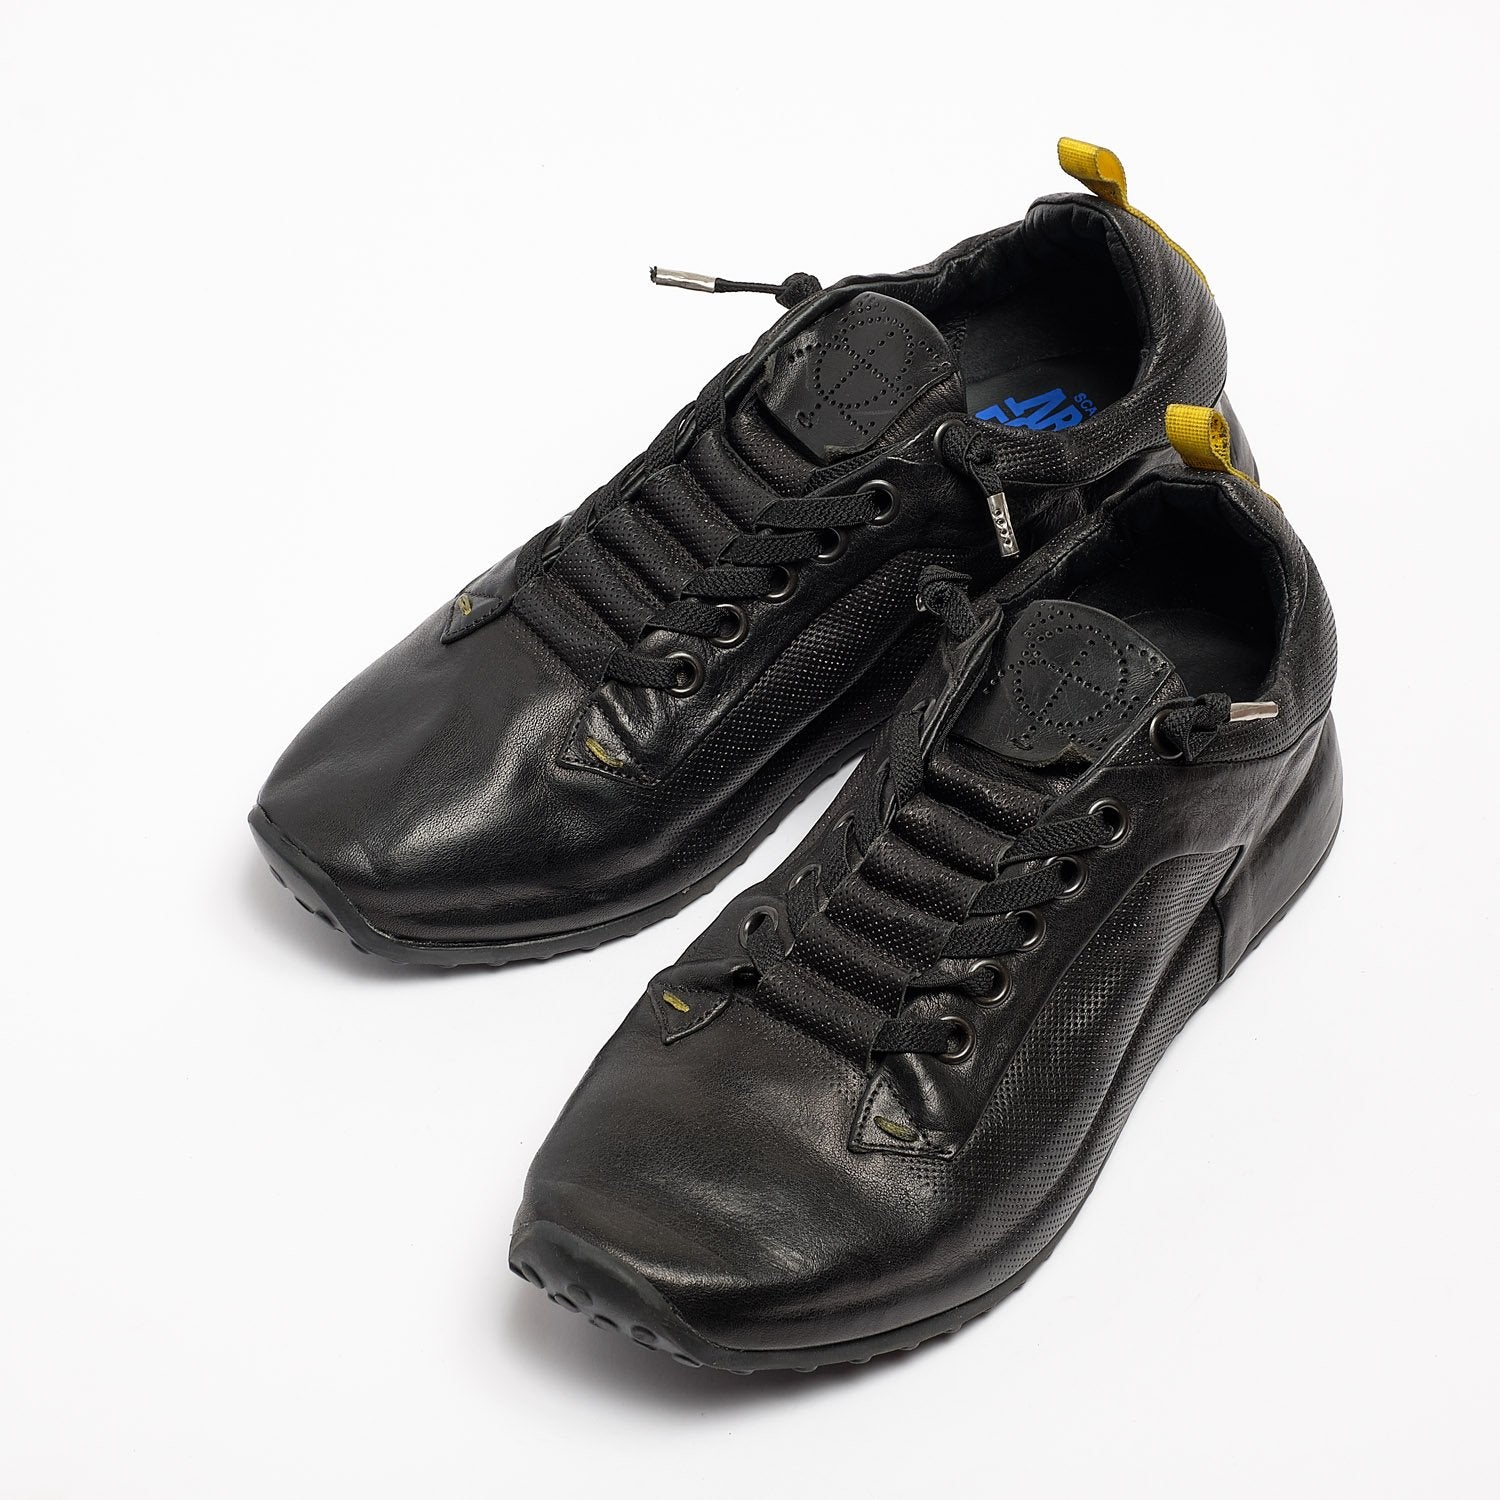 Johnny Laced Shoes soft natural leather black